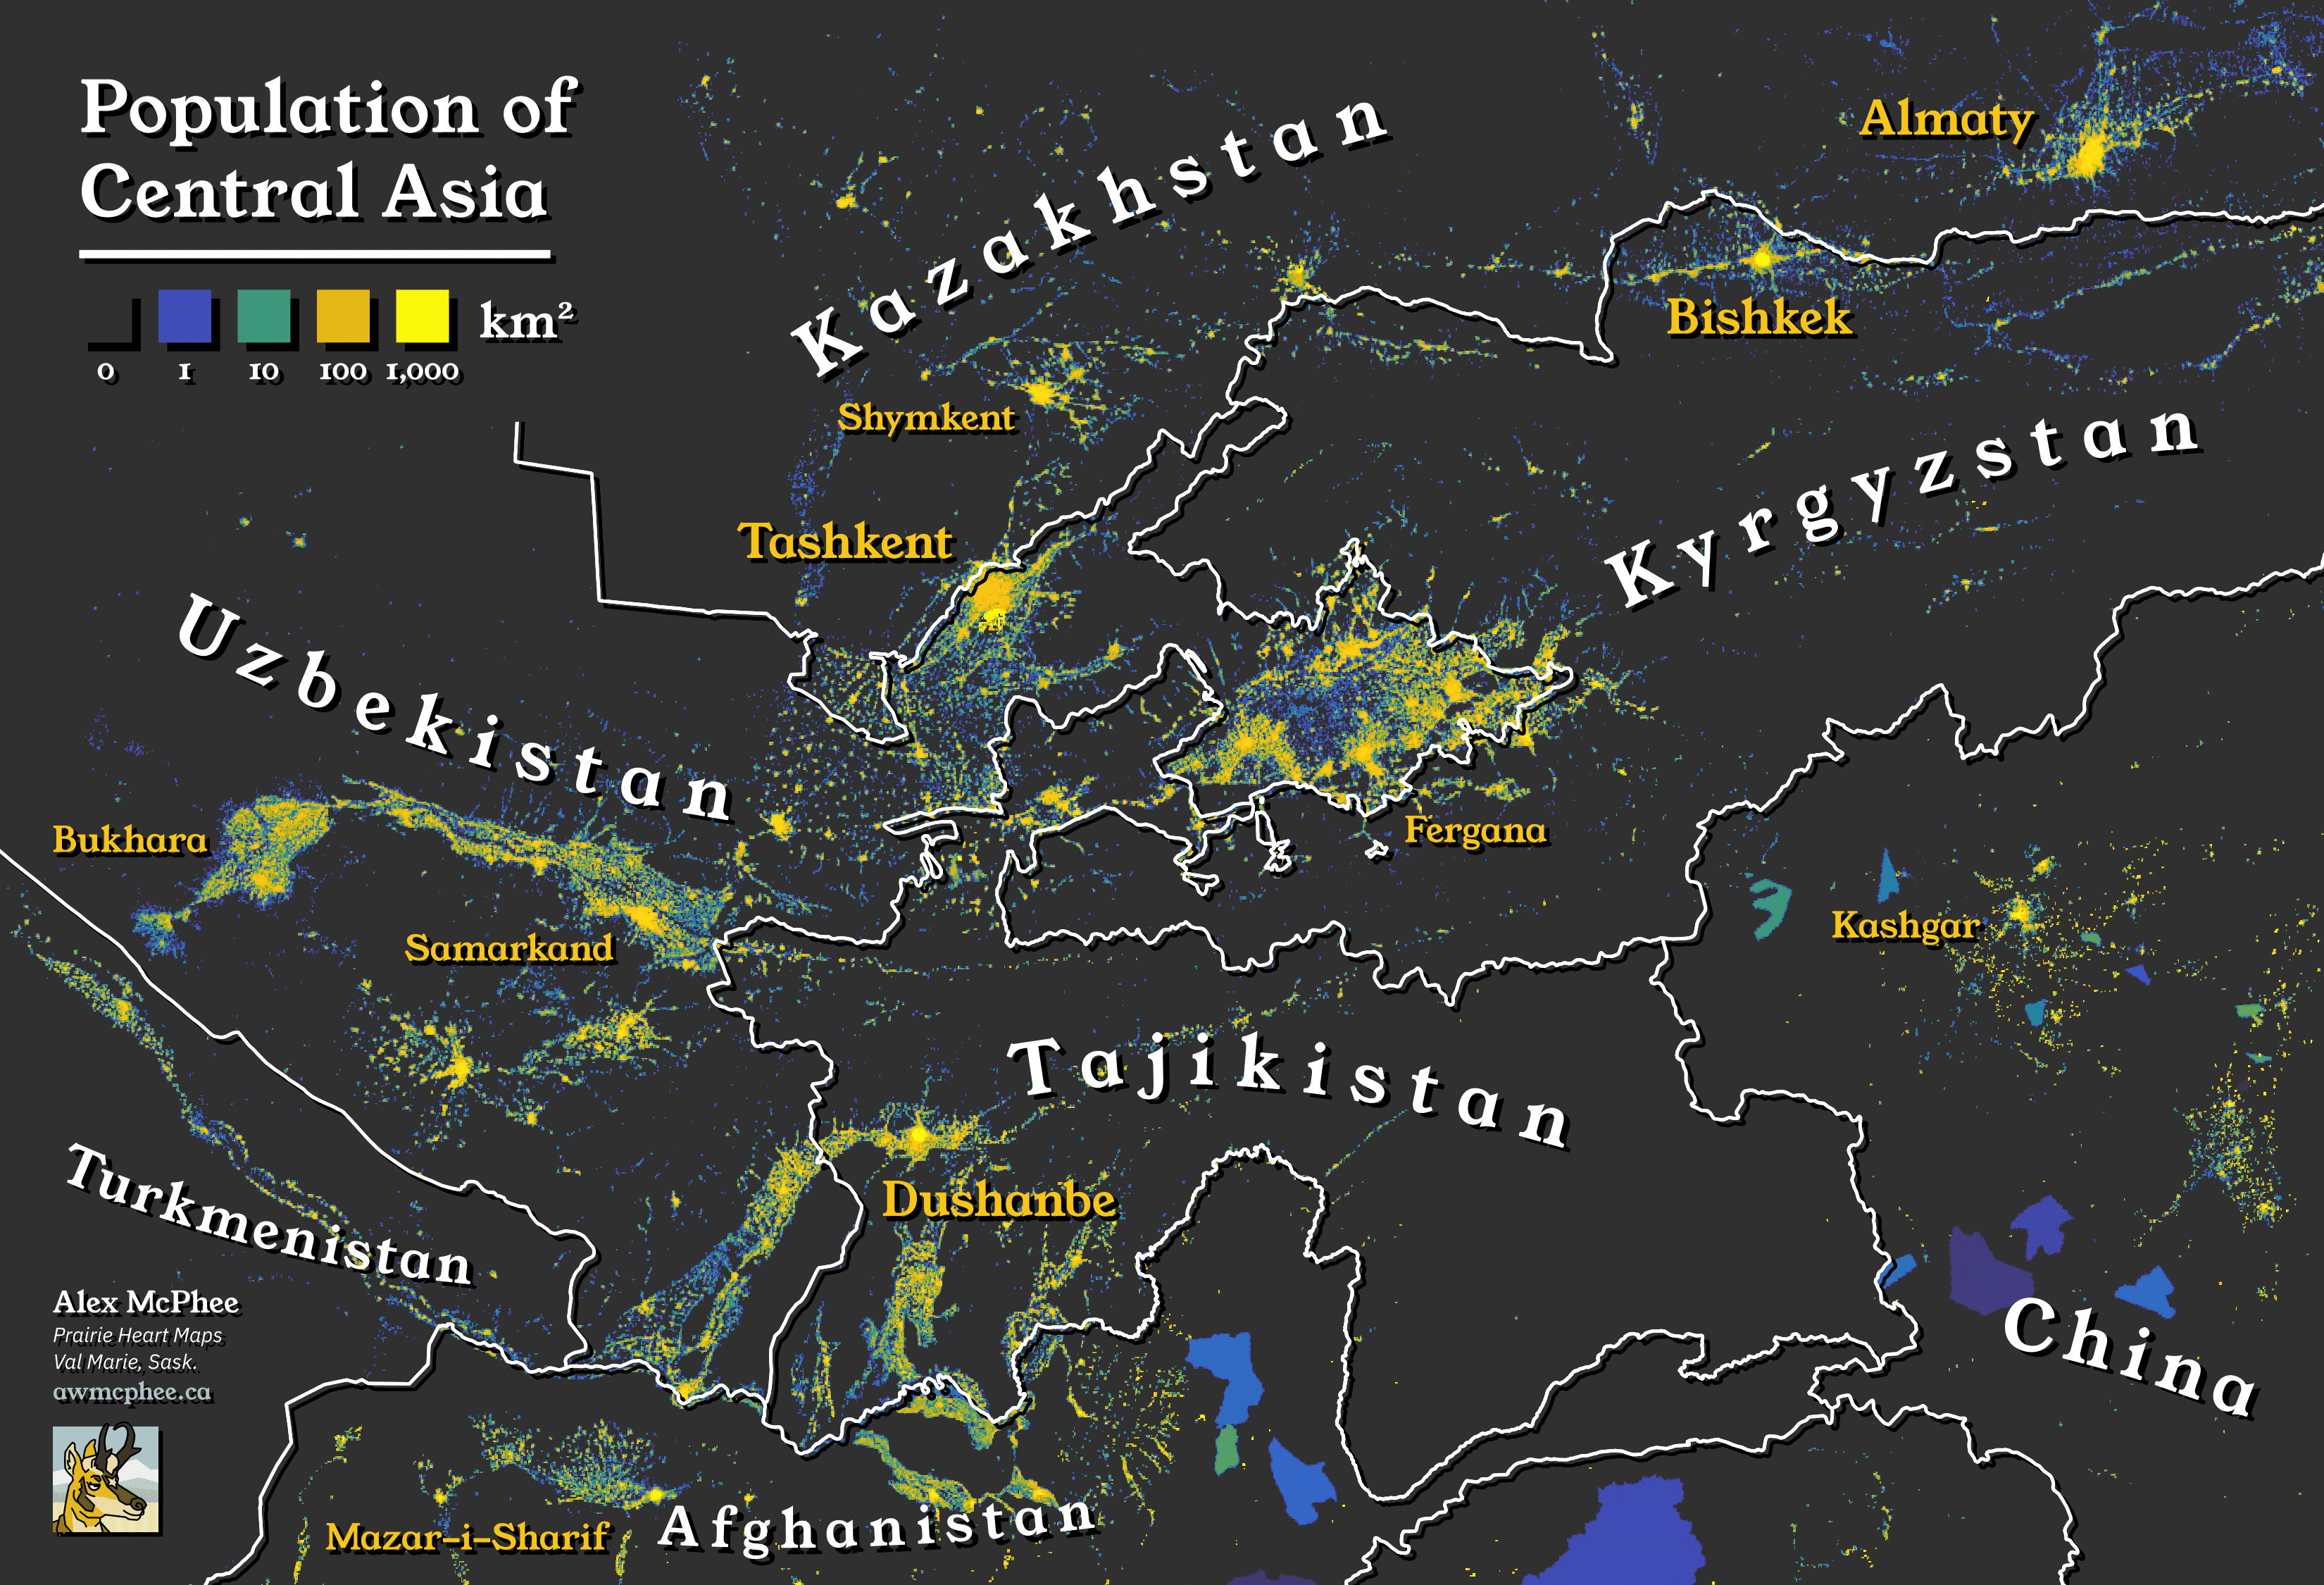 A map showing the population density and borders of Central Asia.